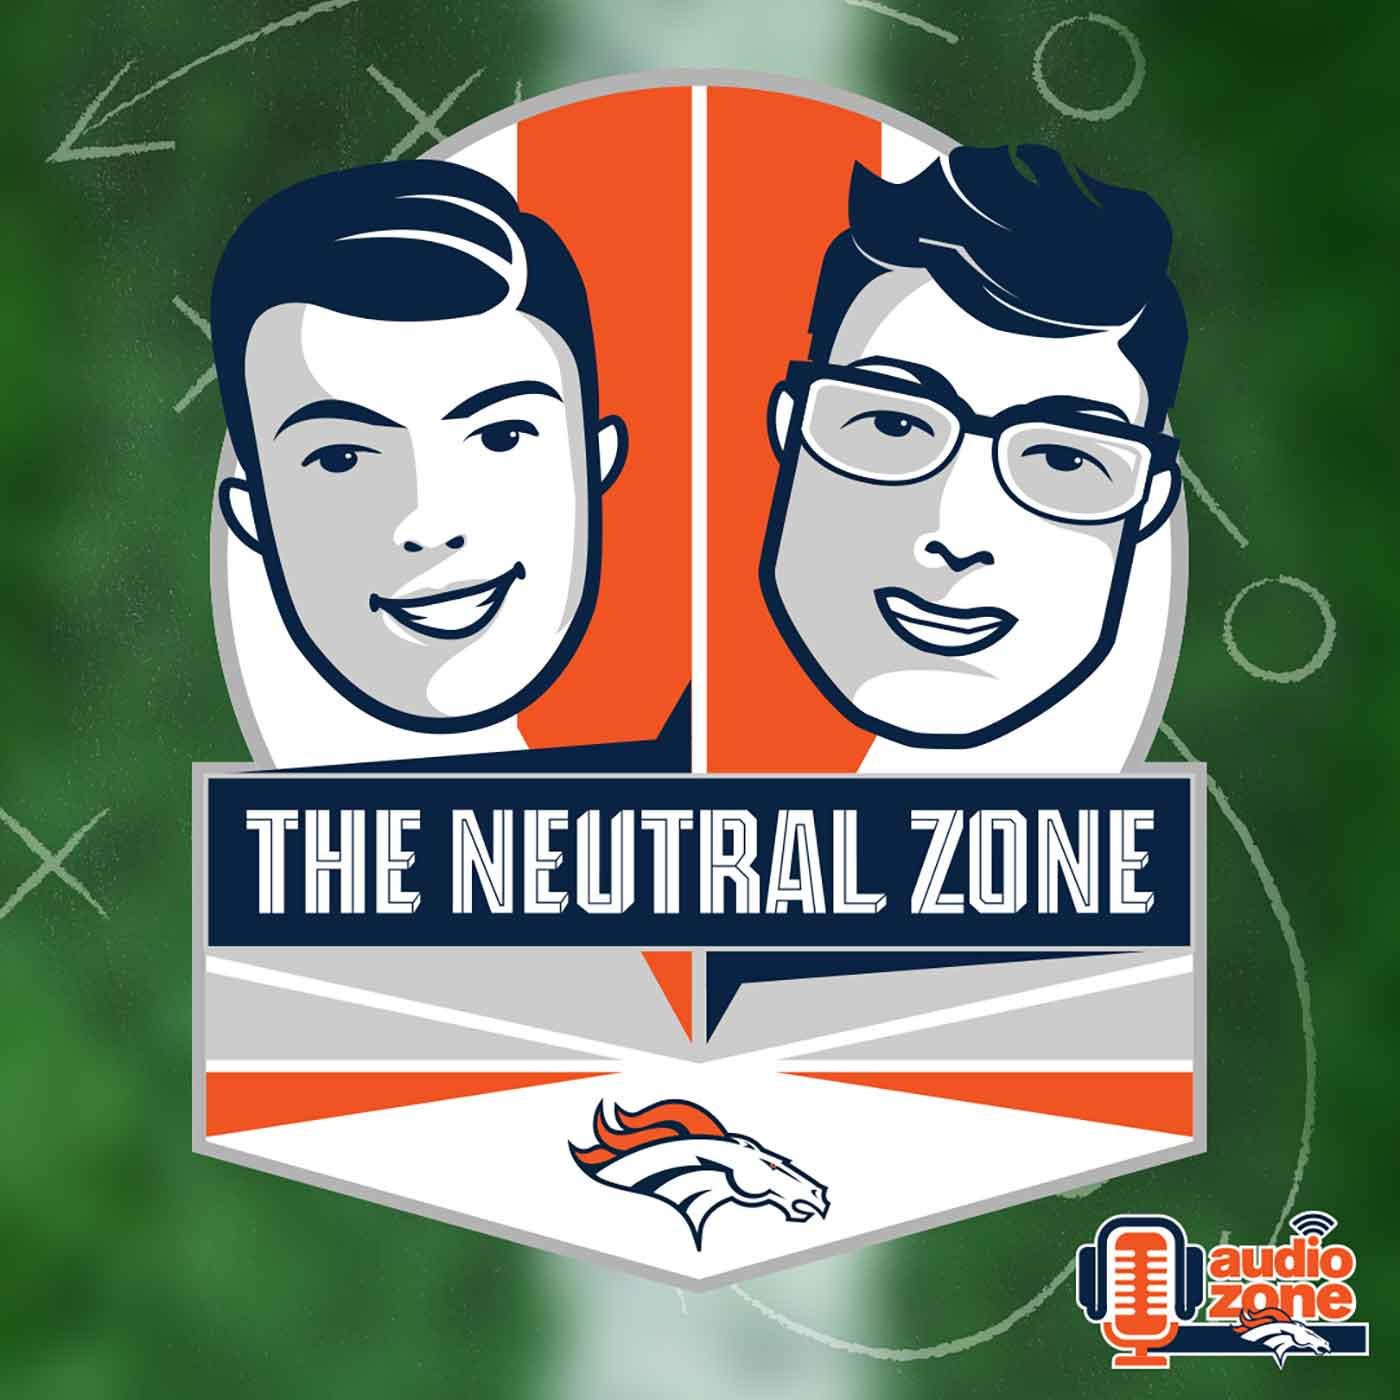 The Neutral Zone (Ep. 165): How the Broncos can slow Trevor Lawrence, improve to 2-0 despite injuries